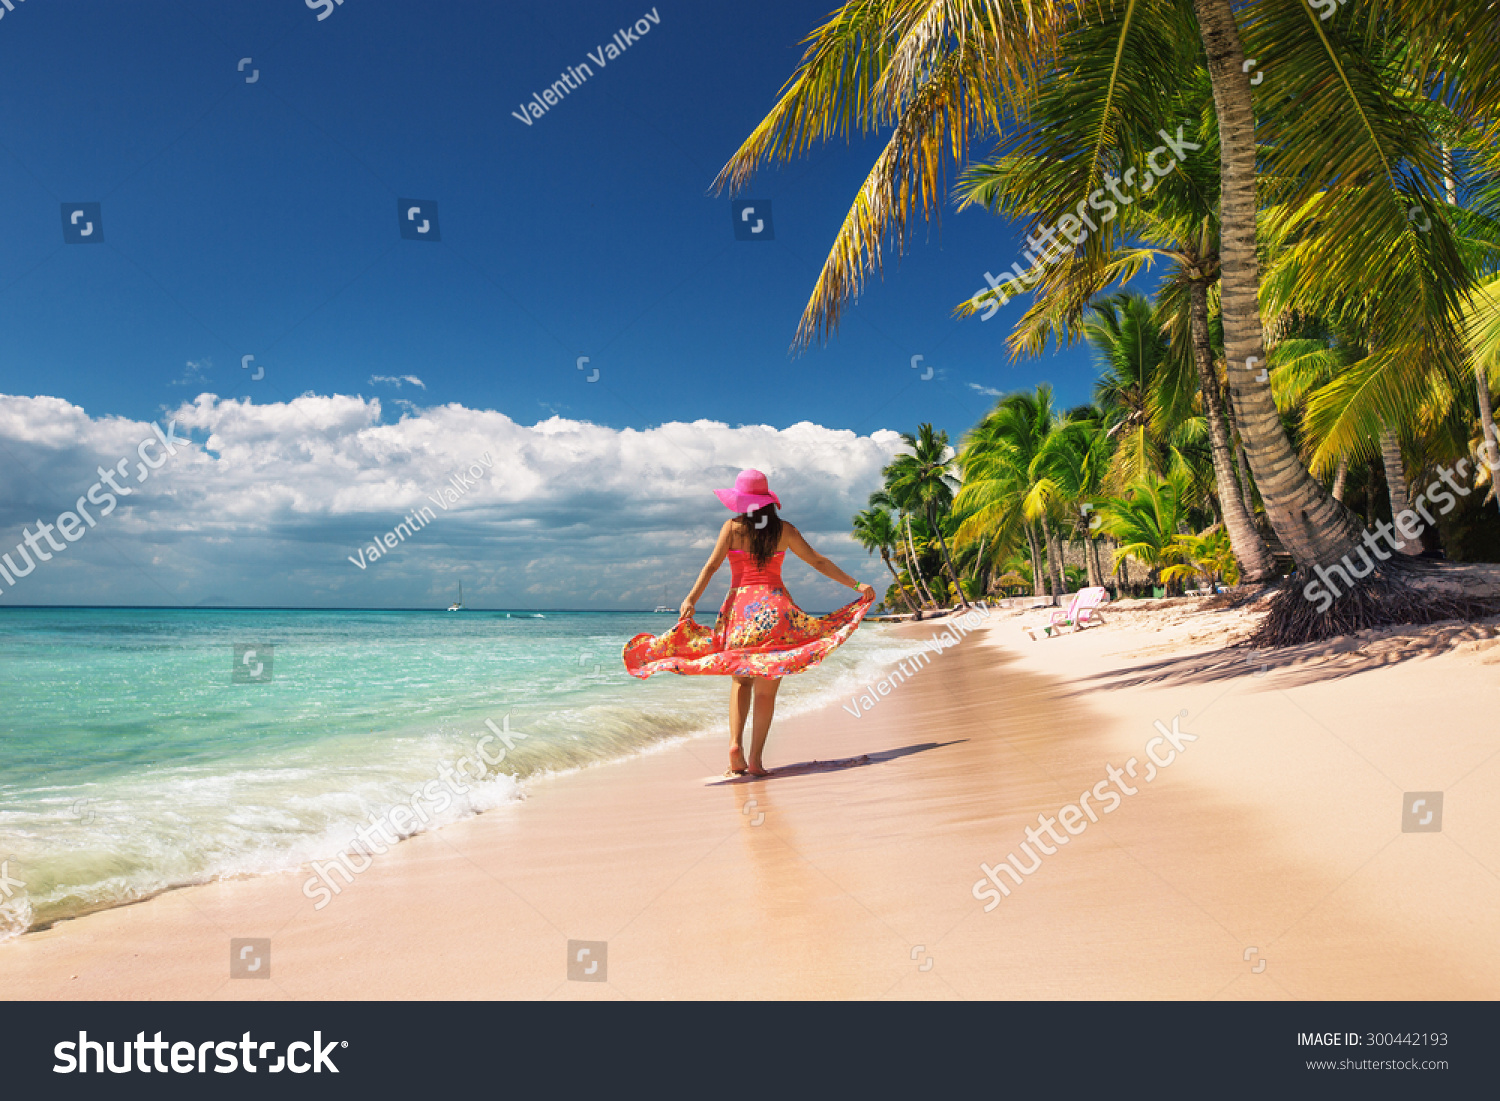 Carefree, Young woman relaxing on the islands beach #300442193